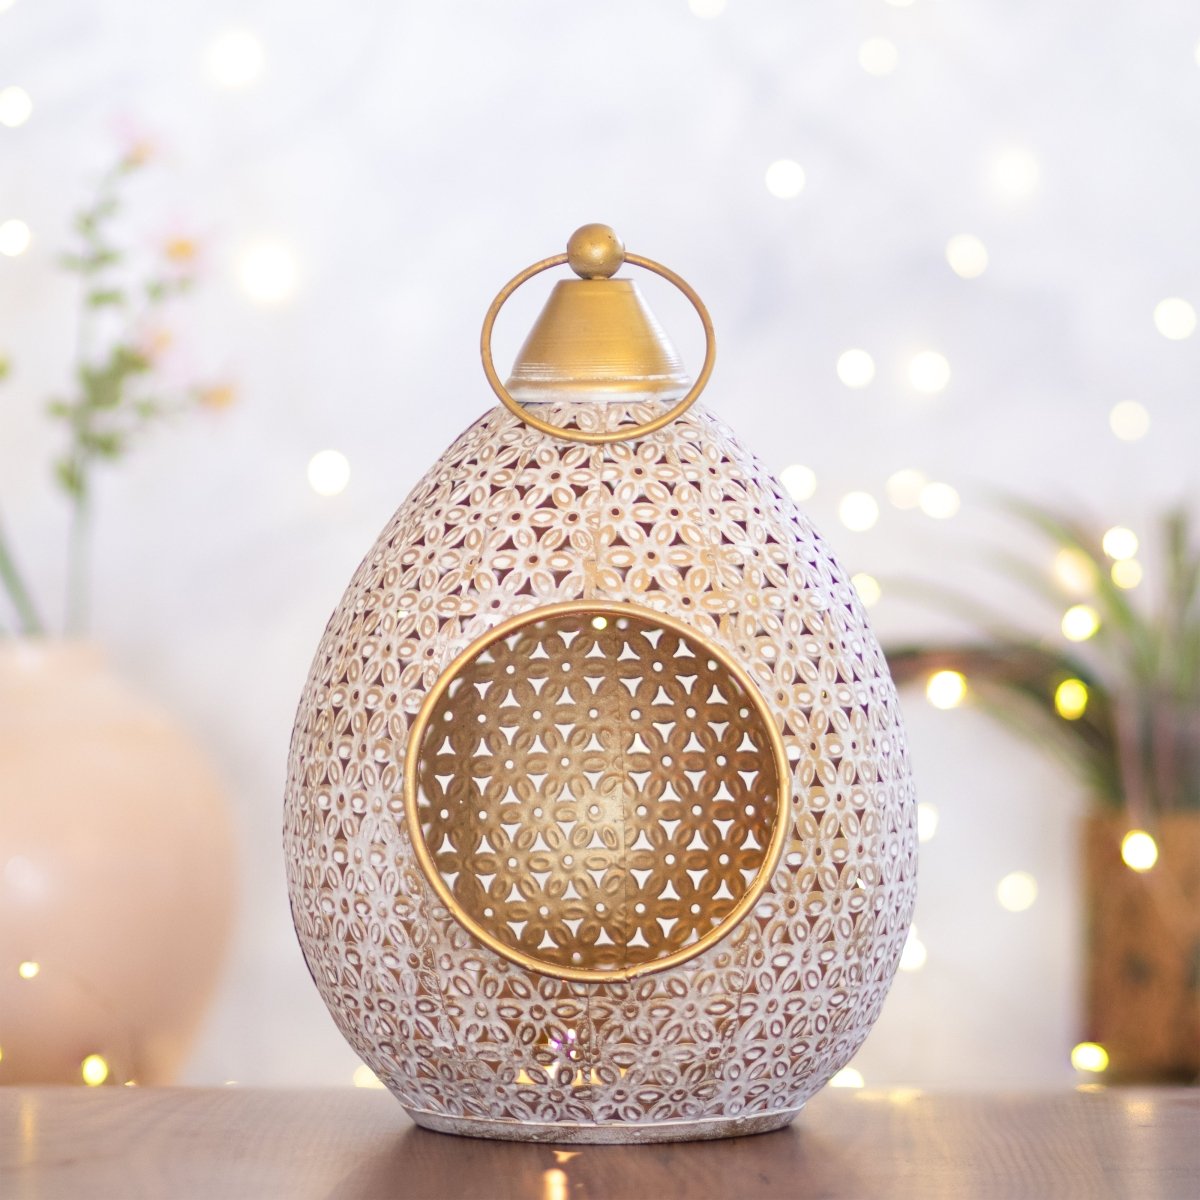 Kezevel Metal Tealight Candle Holder - Handcrafted Conical Golden Washed White Candle Holder for Home Decoration, Table Decor